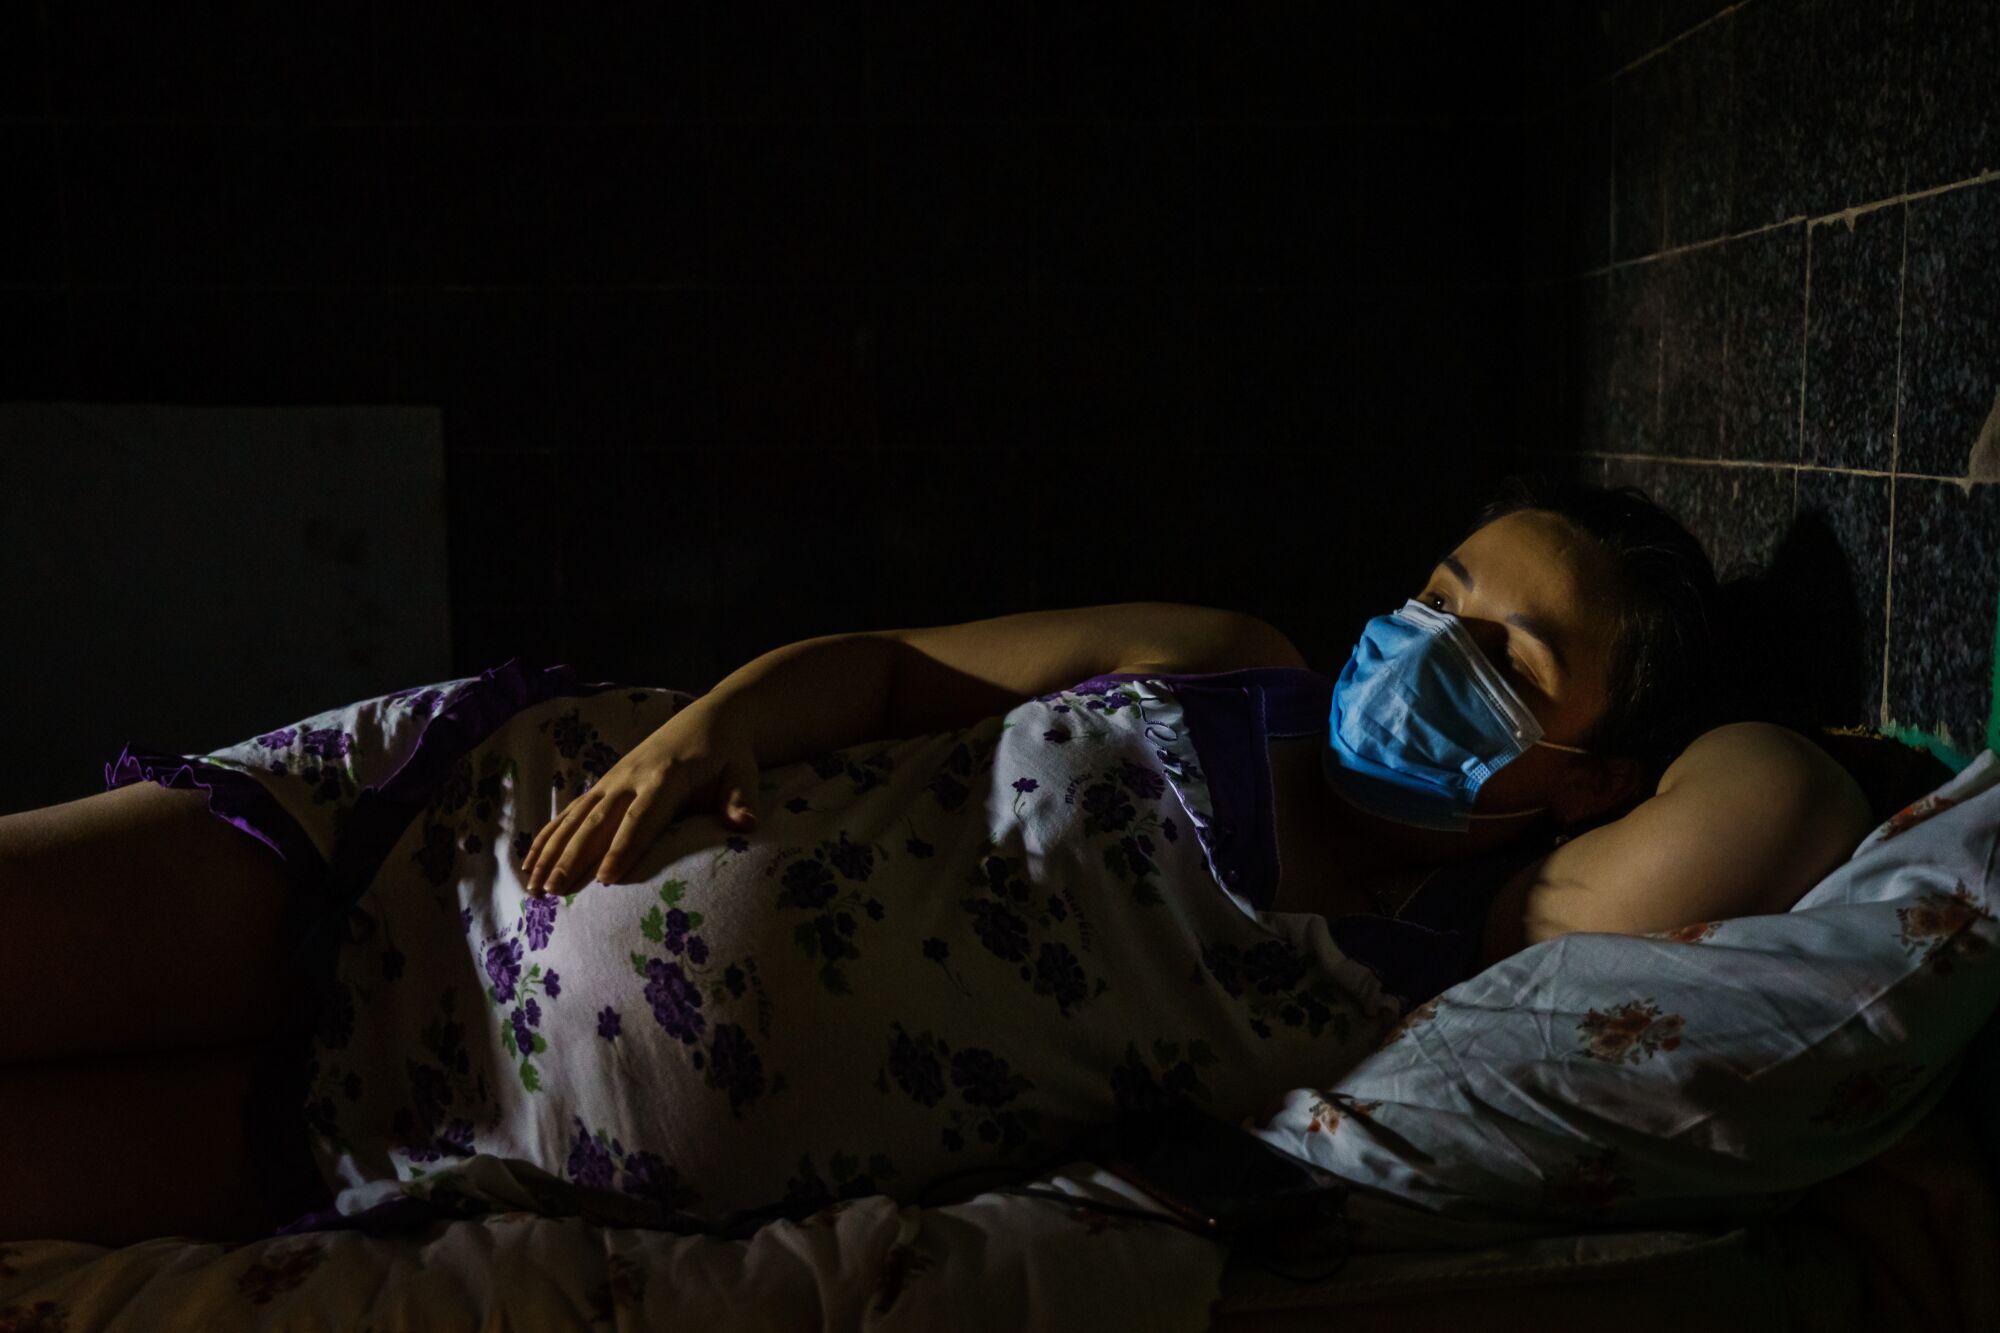 A pregnant woman with a face mask on lying on her side in a darkened shelter